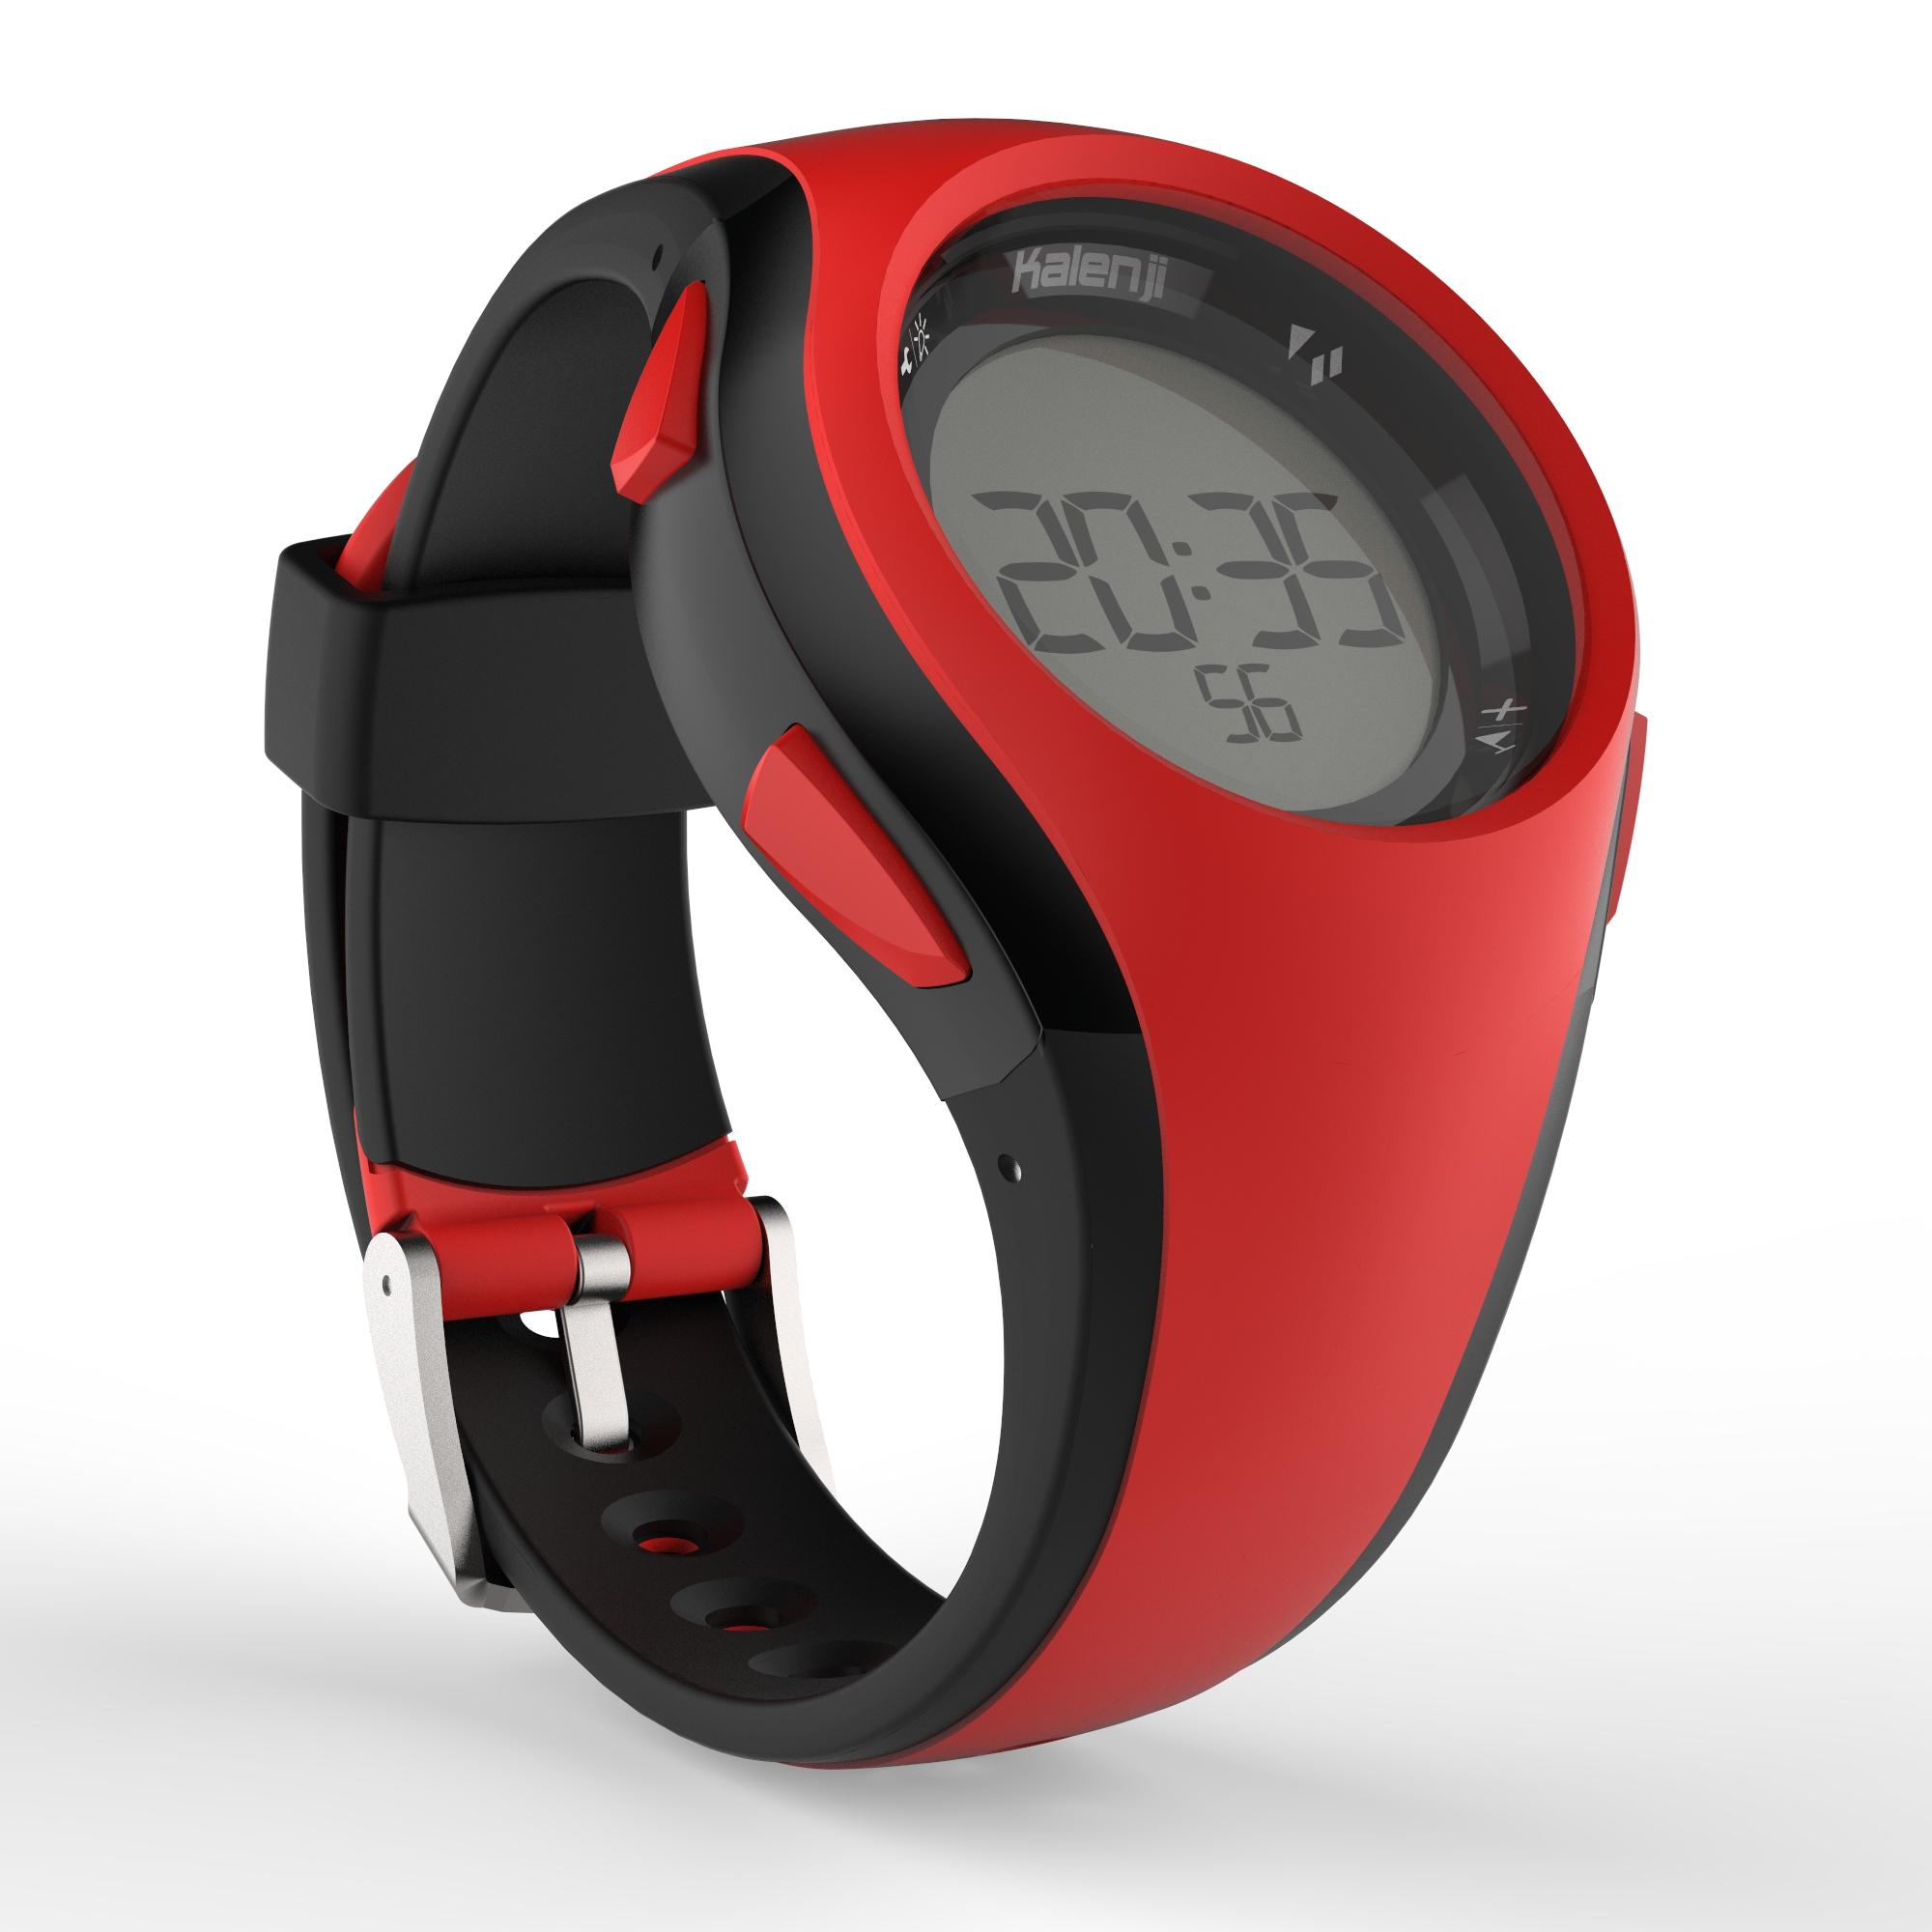 W200 M running stopwatch - Red and Black